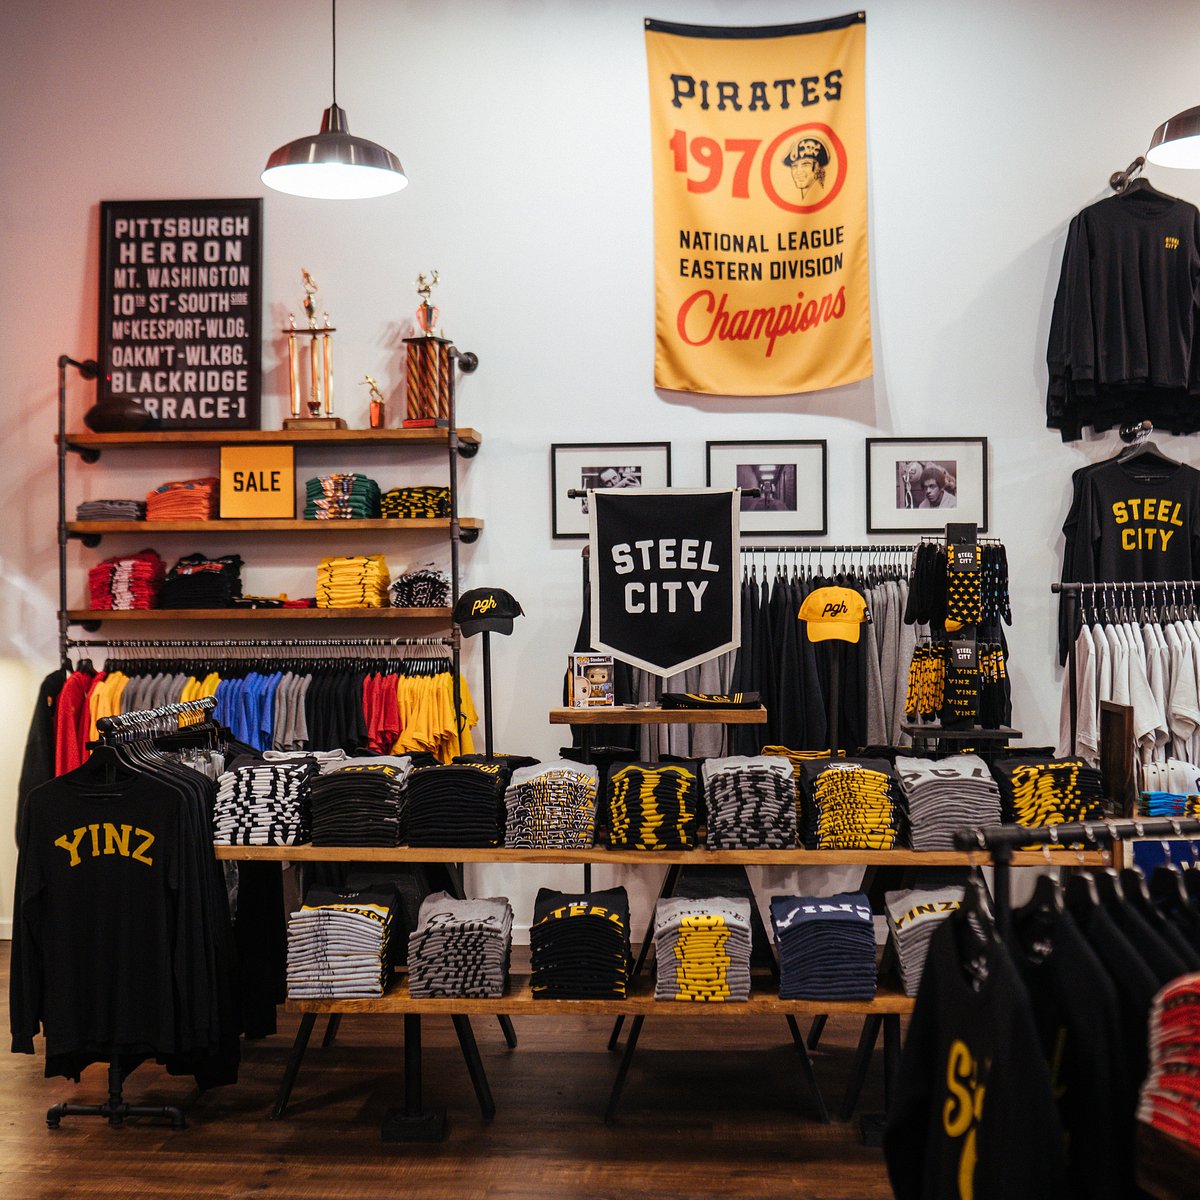 Pittsburgh Pirates Gifts & Merchandise for Sale